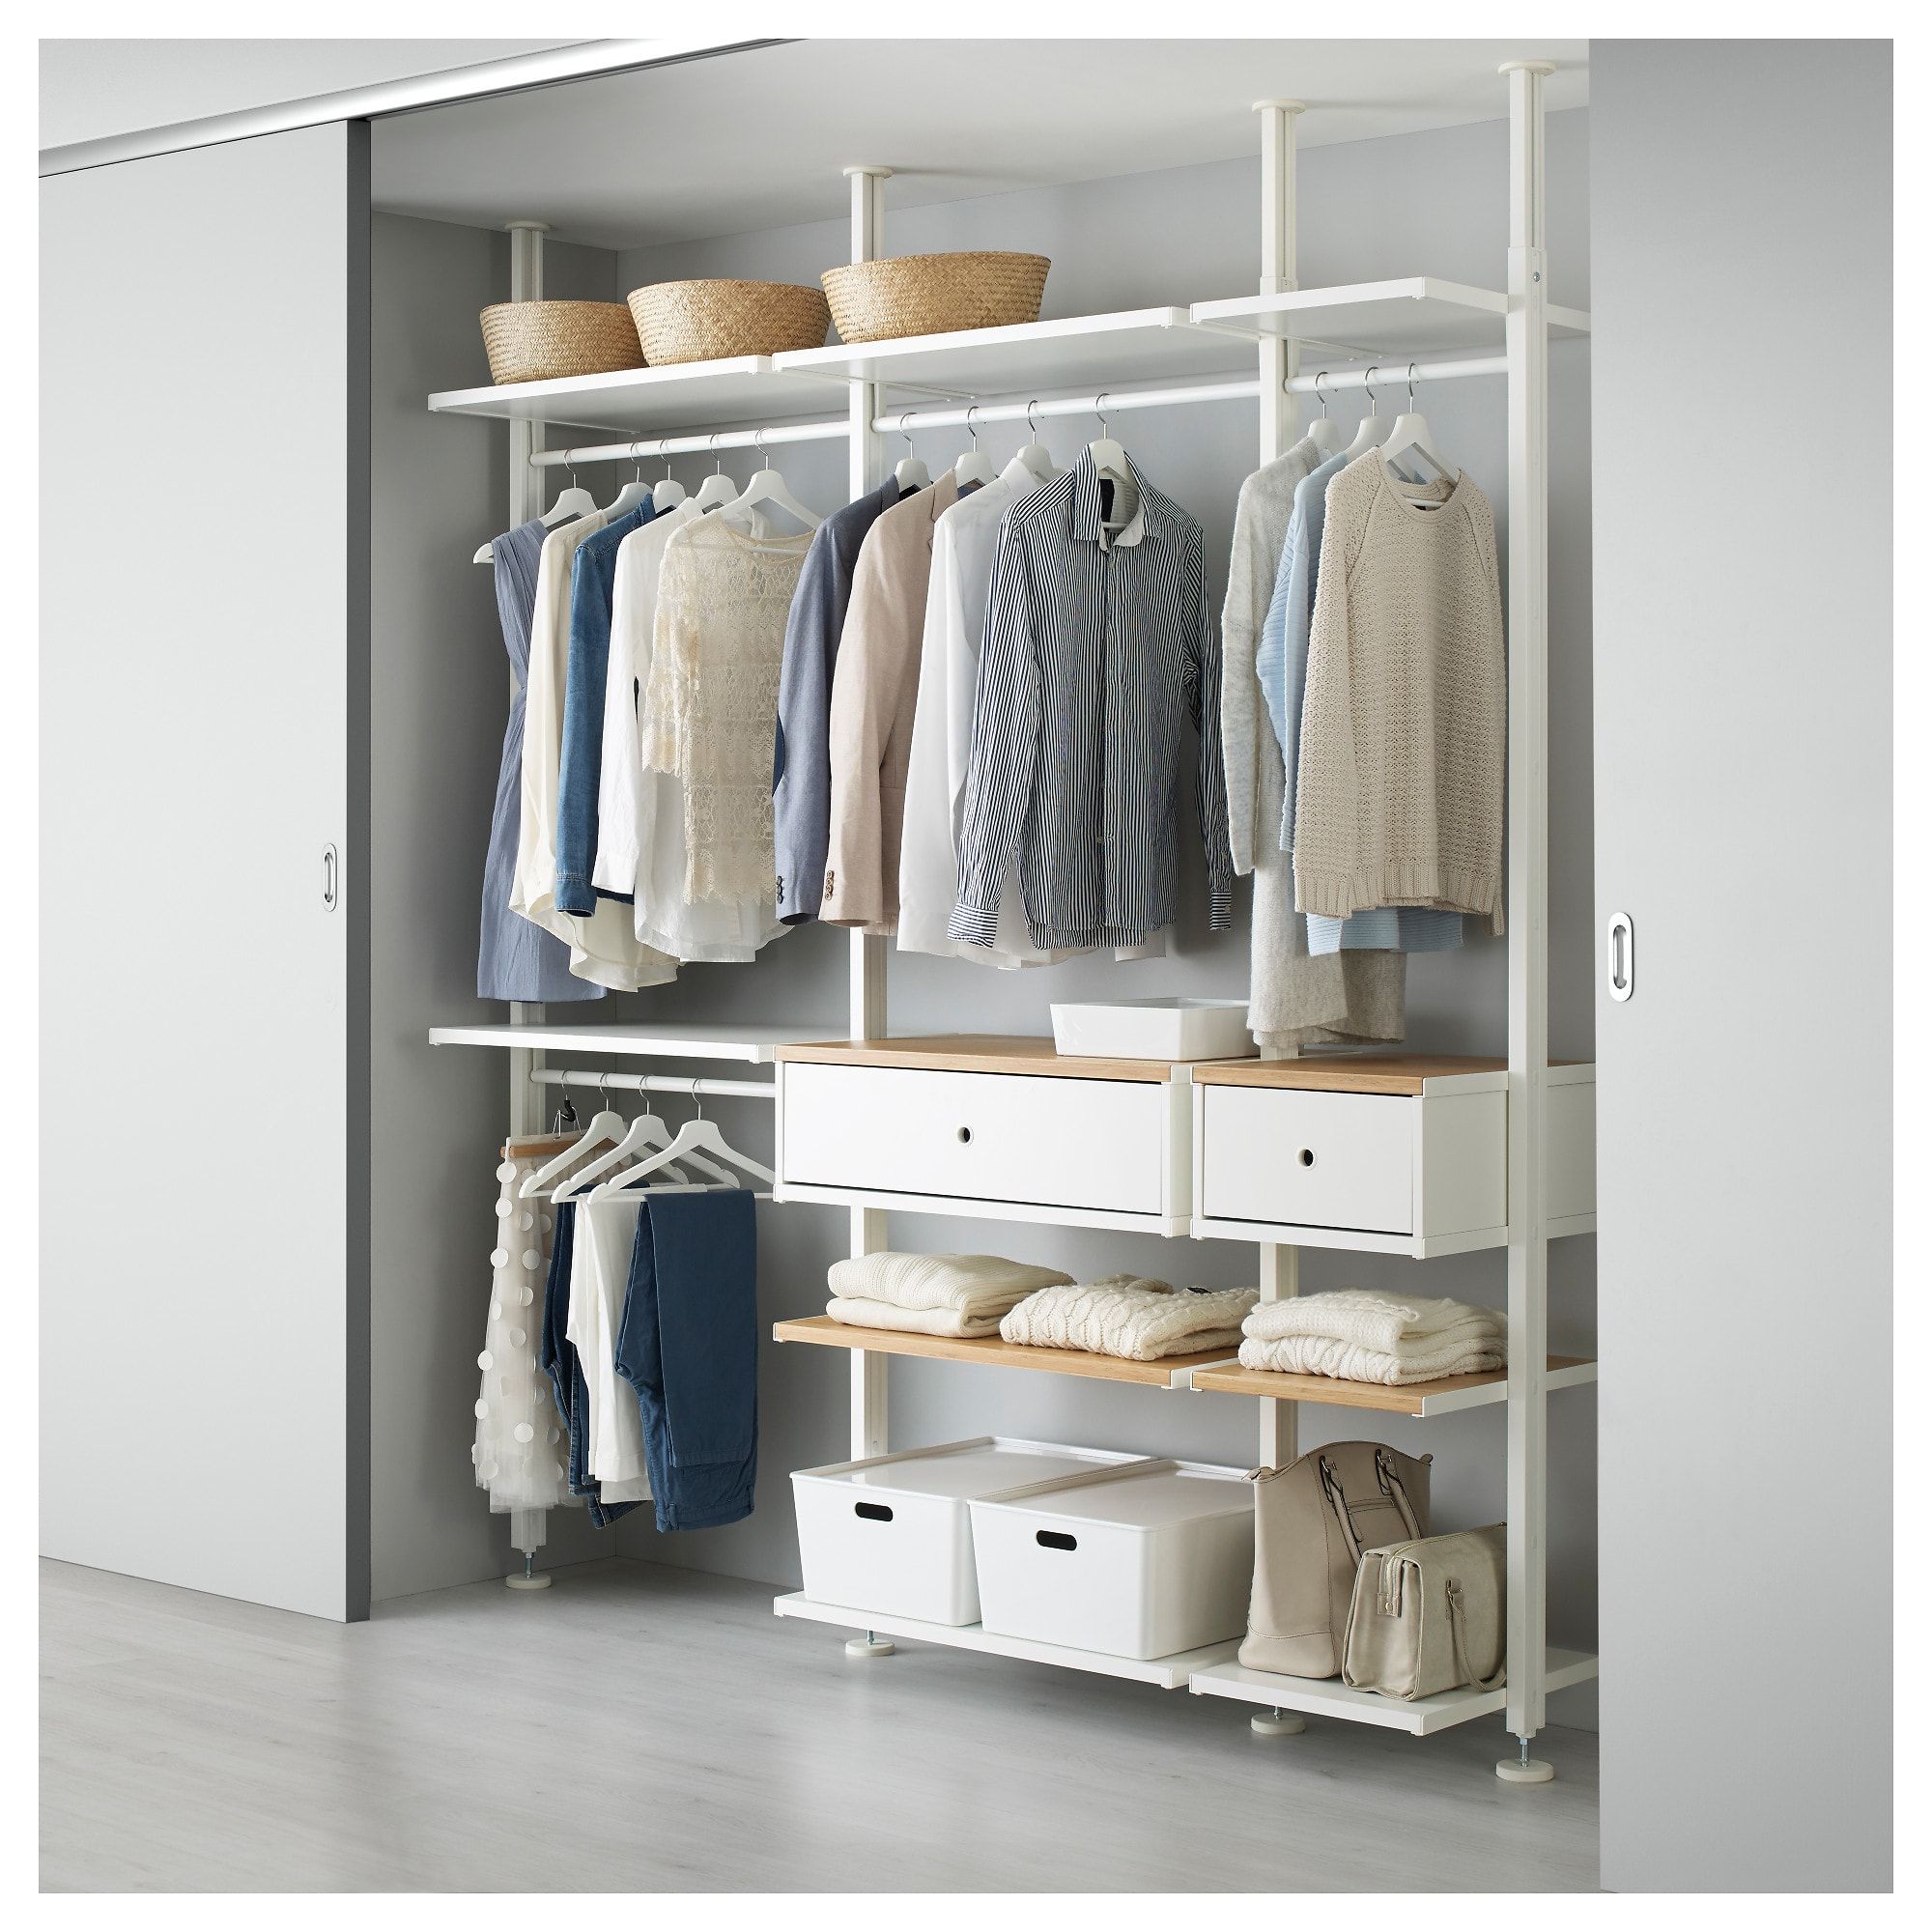 Ikea Open Clothes Shoe Storages, – Komnit Store Ikea Open Clothes Shoe  Storages, – Komnit Store Within Wardrobe Hangers Storages (View 4 of 15)